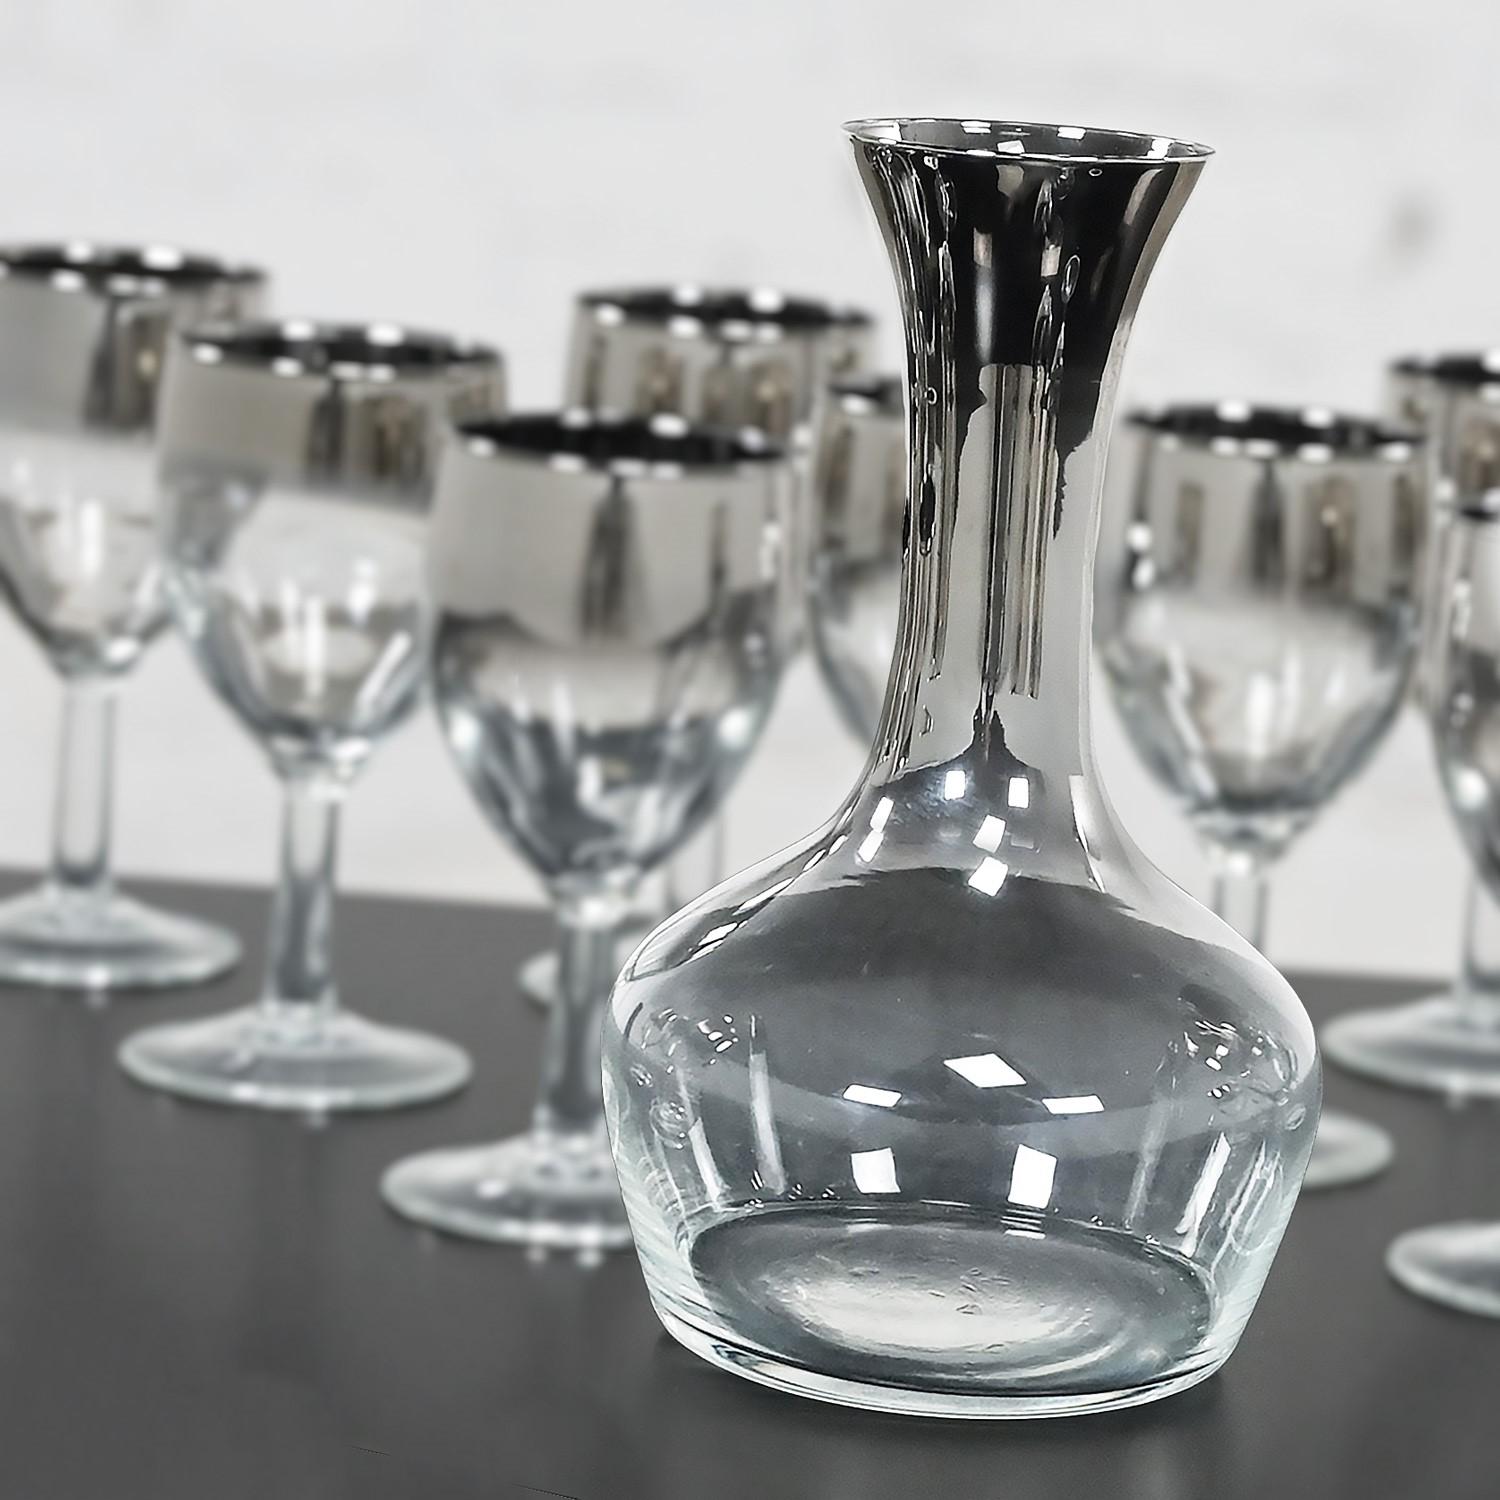 By Vintage mid-century modern beverage serving set of eight silver fade ombre French stem glasses and one carafe or decanter in the style of Dorothy Thorpe but unsigned. Byit, en gardant à l'esprit qu'il s'agit d'une pièce vintage et non pas neuve,